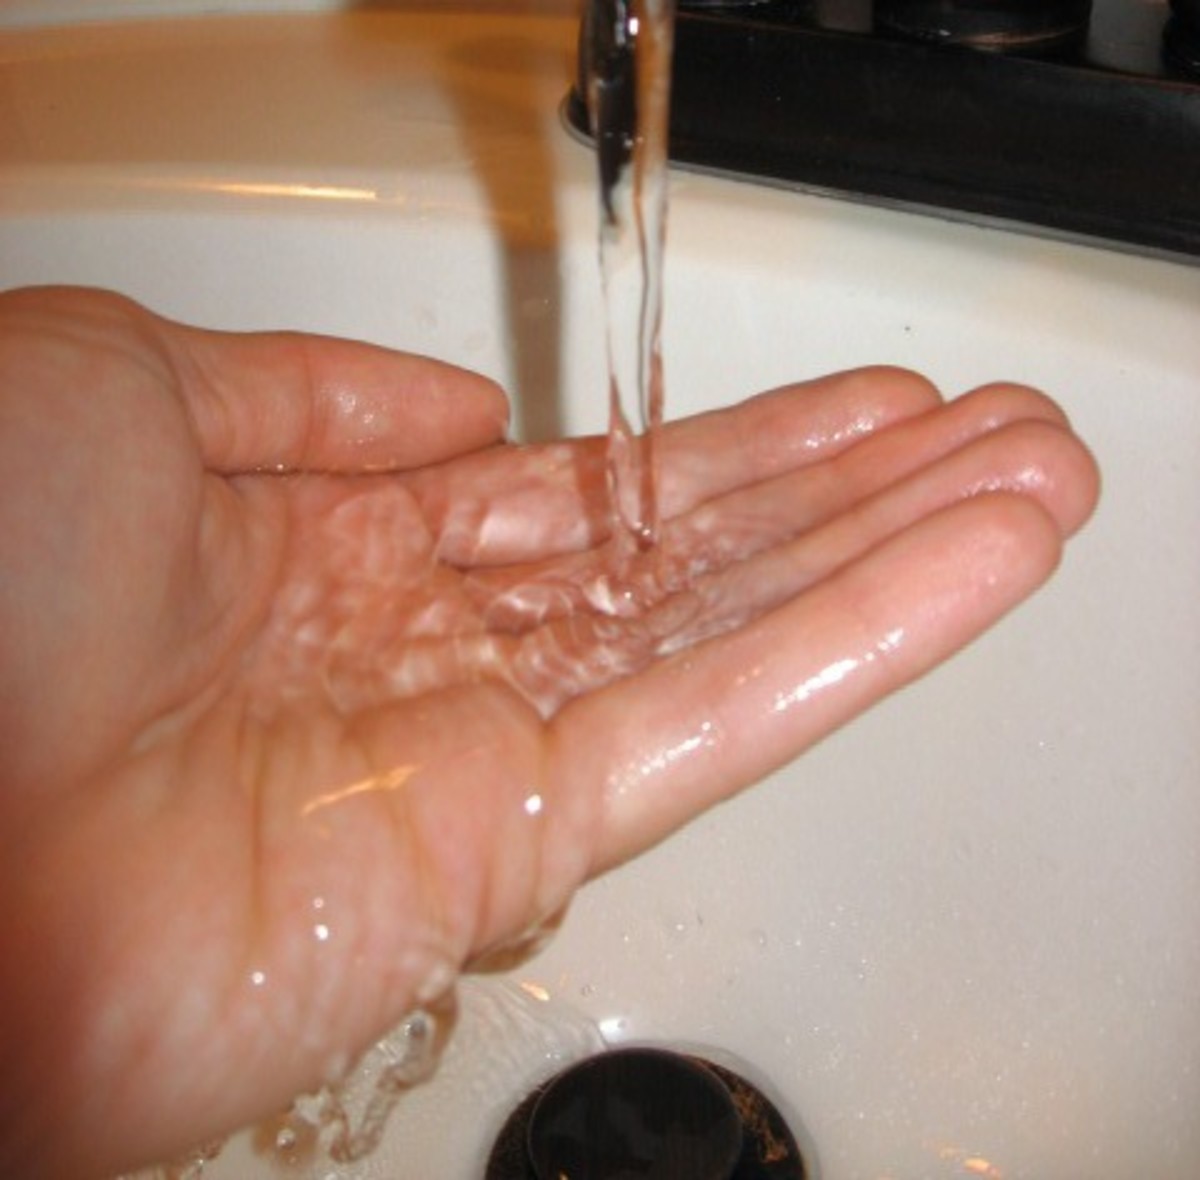 Wash your hands with soap and warm water for 30 seconds.